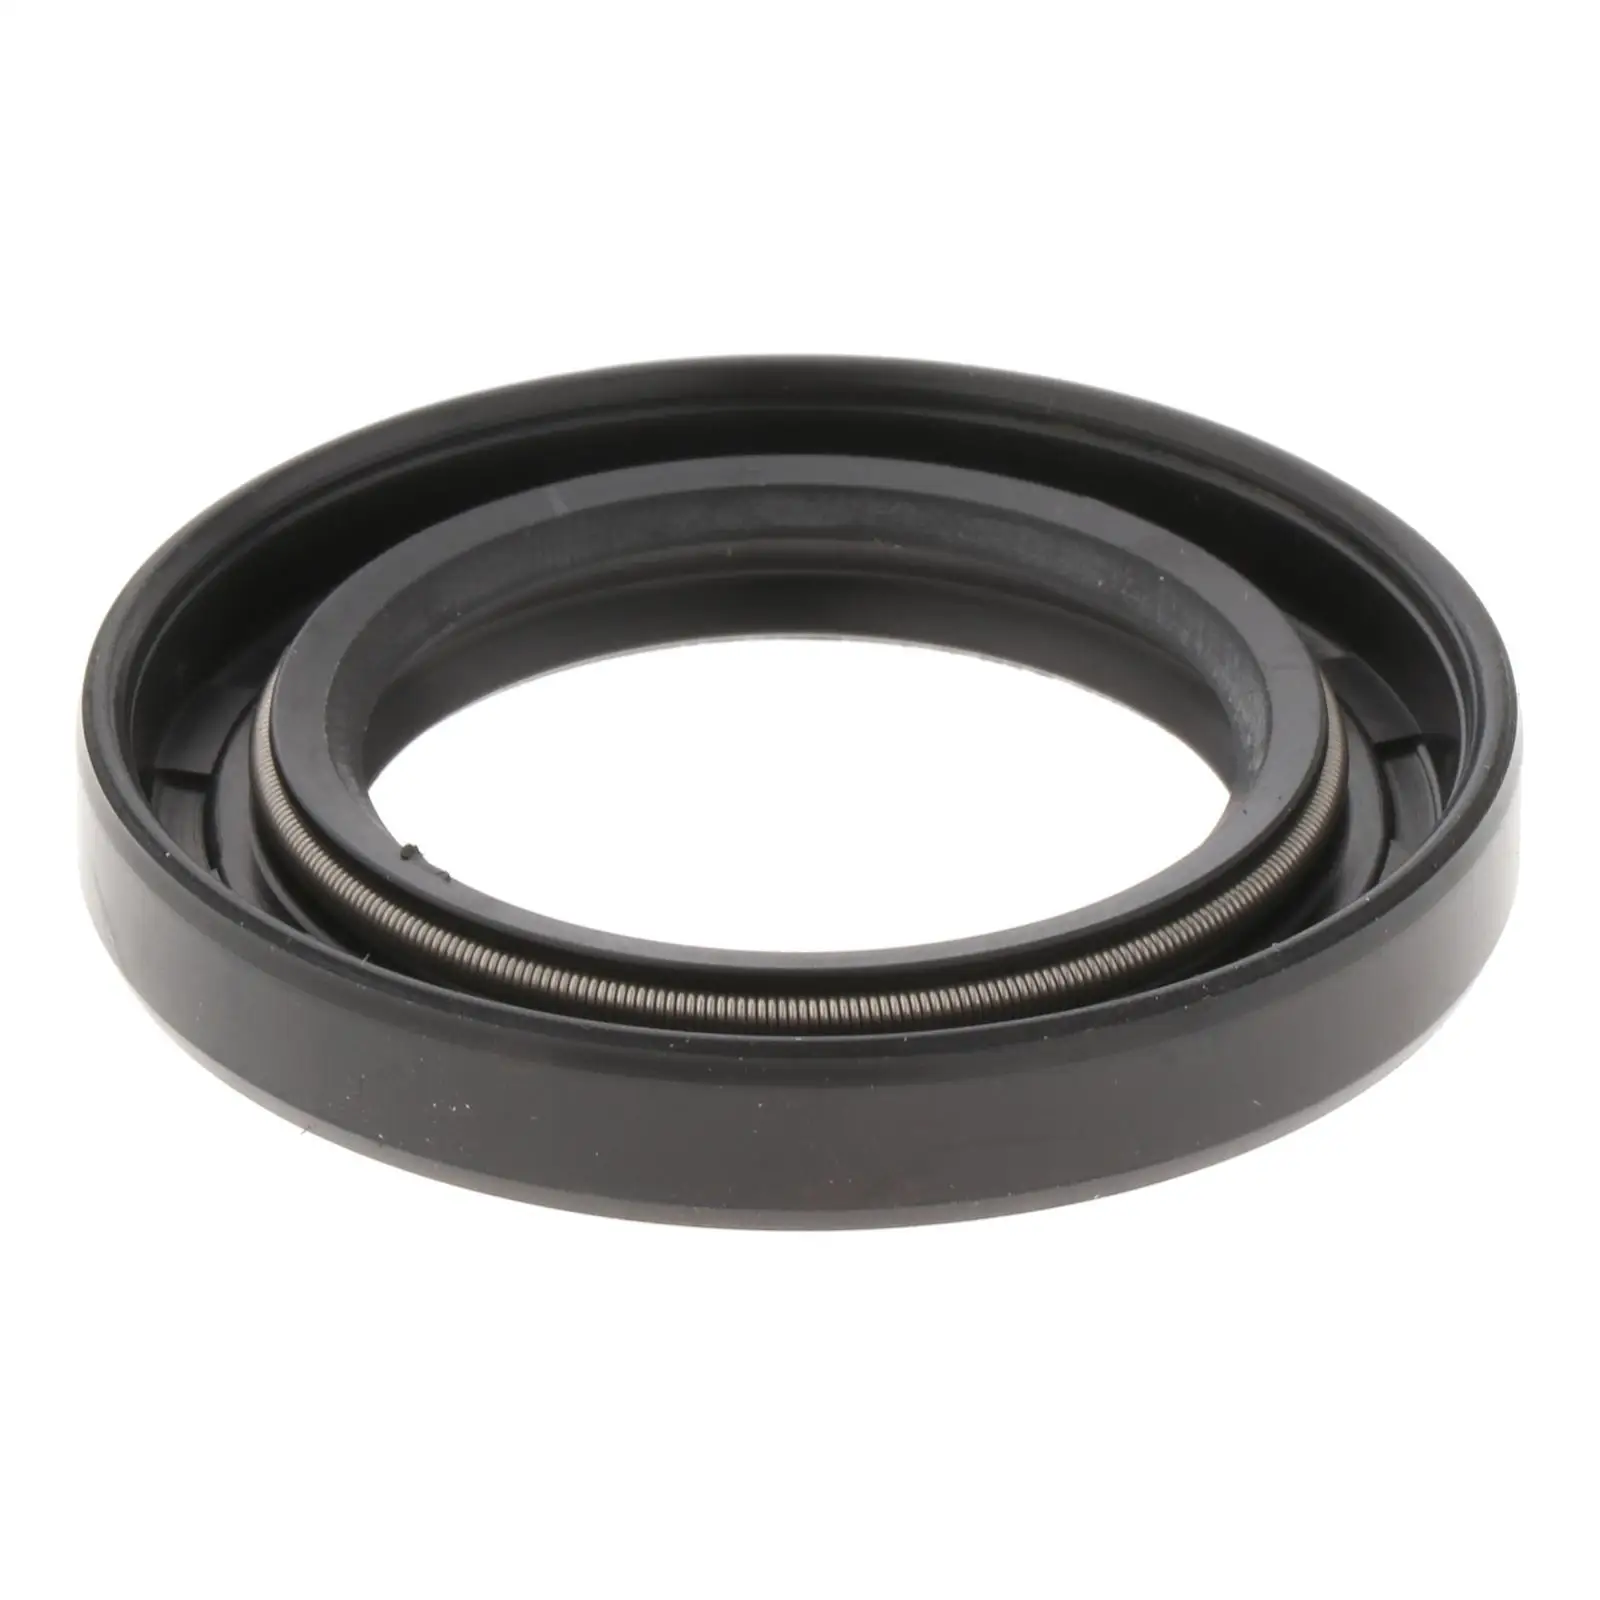 Oil Seal, 93102-30M23, Fit for Yamaha Outboard Motor 2T 60HP-90HP Accessory Easy to Install Direct Replaces Spare Parts